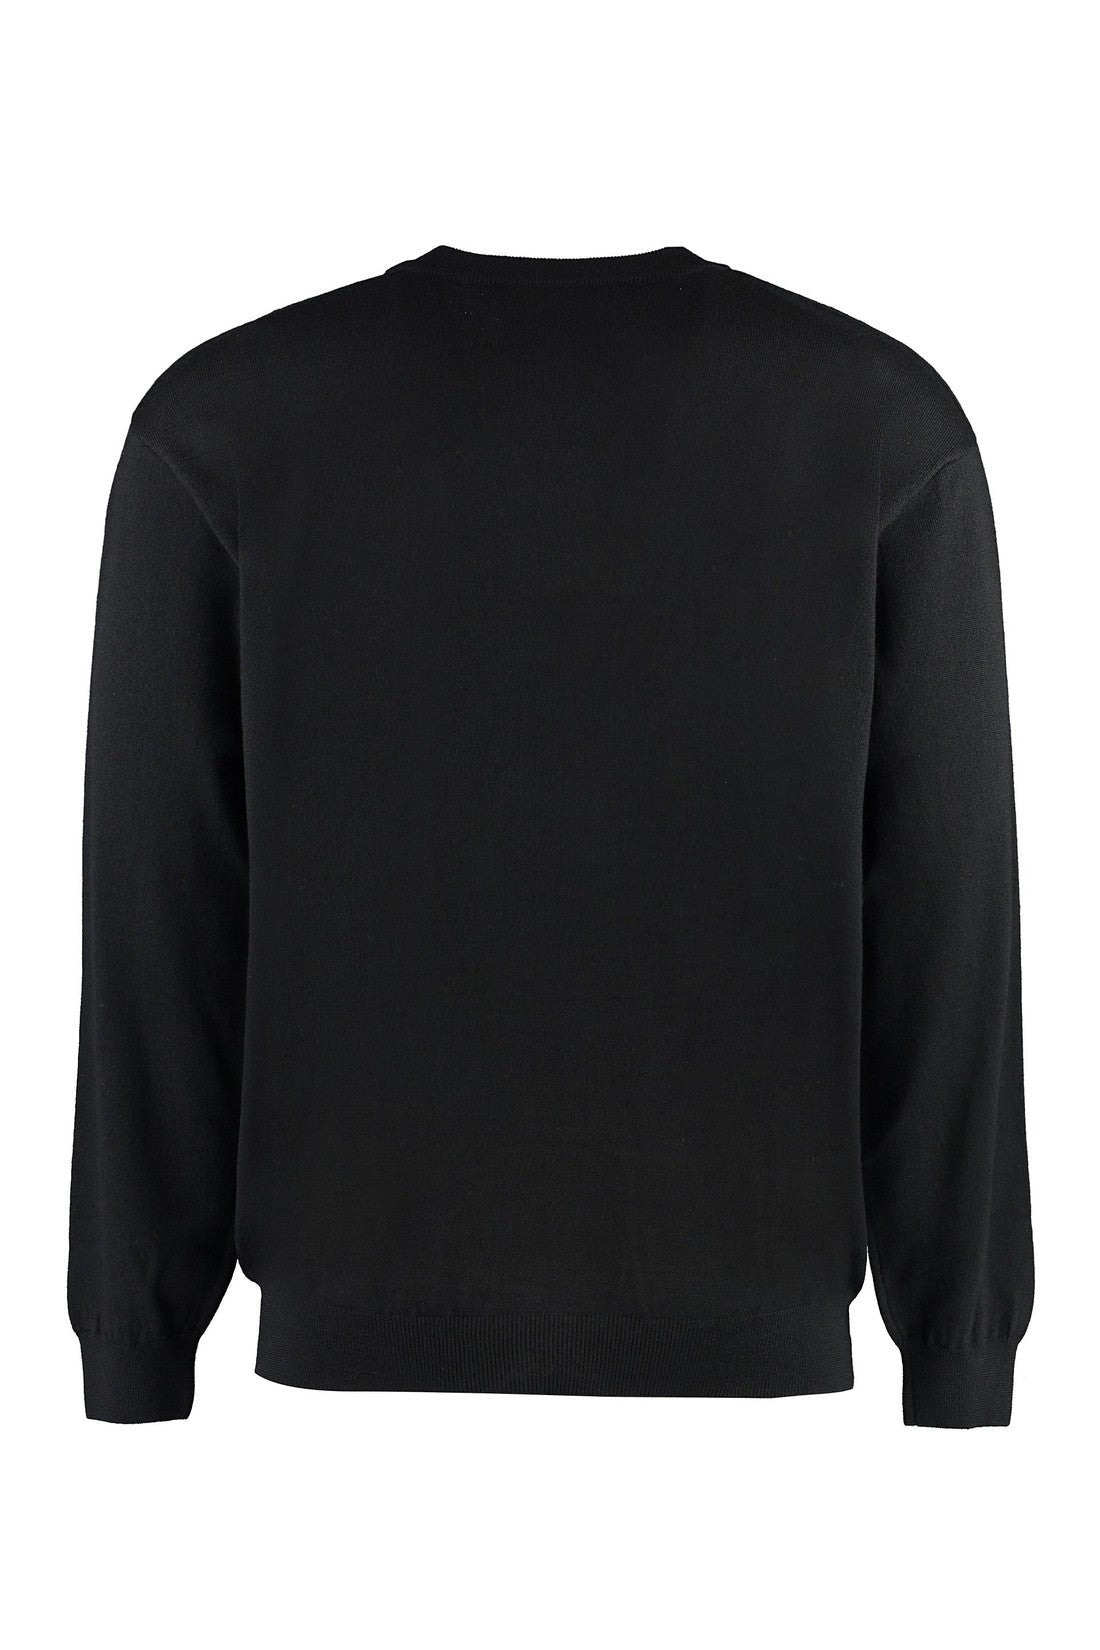 Moschino-OUTLET-SALE-Wool crew-neck sweater-ARCHIVIST